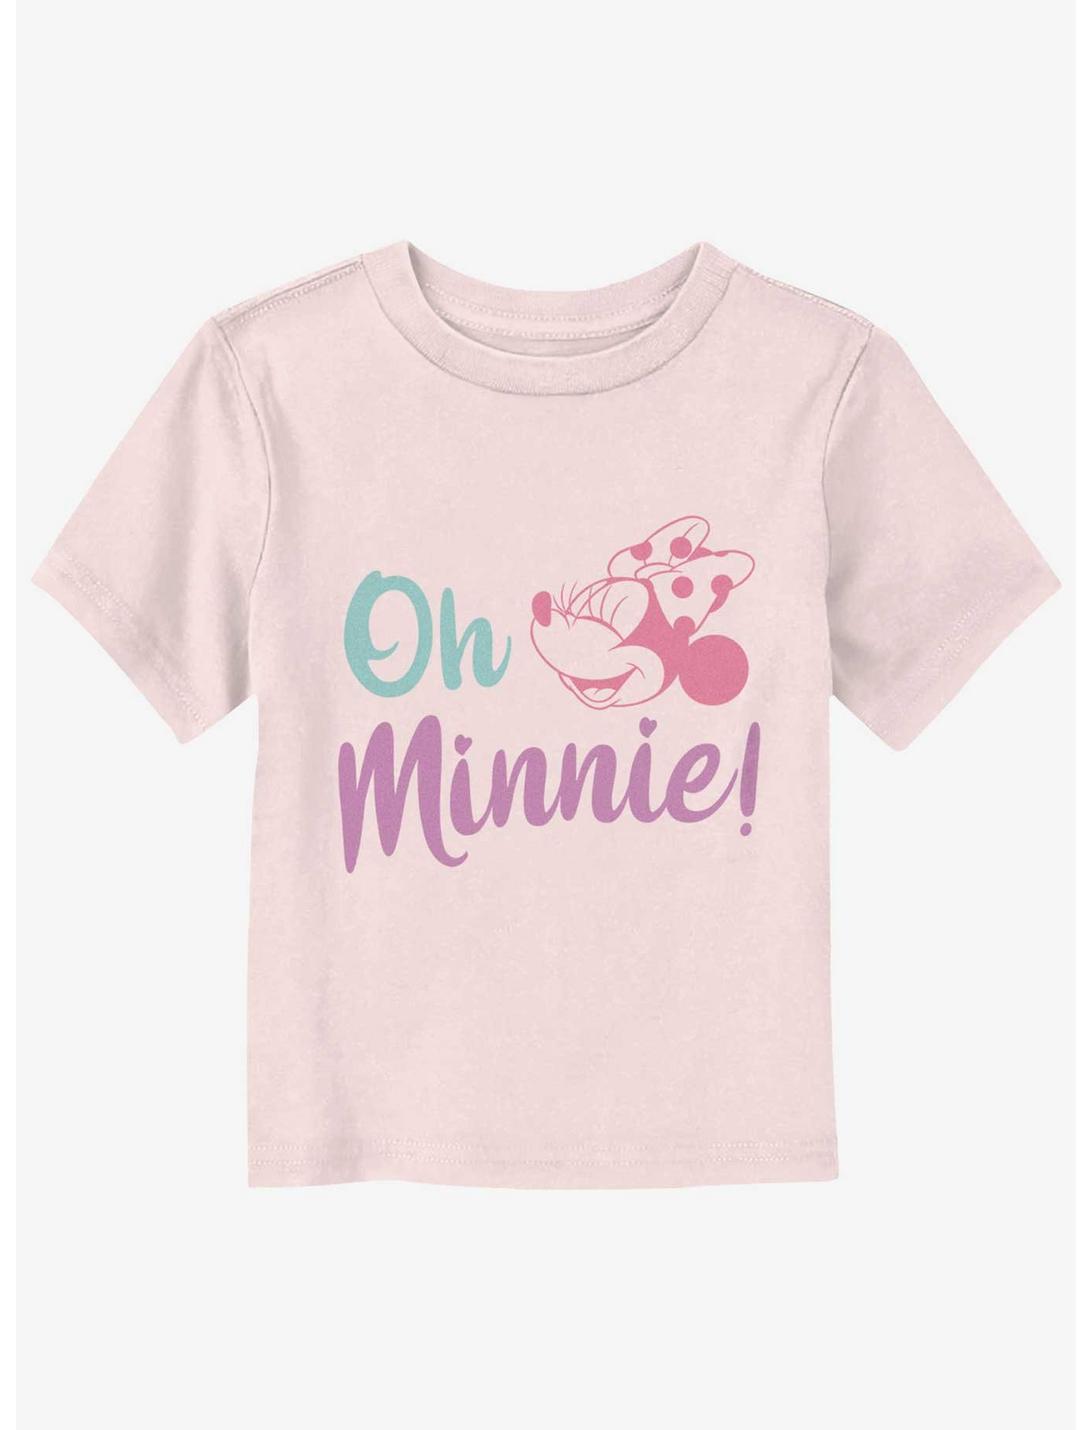 Disney Minnie Mouse Oh Minnie Toddler T-Shirt, LIGHT PINK, hi-res